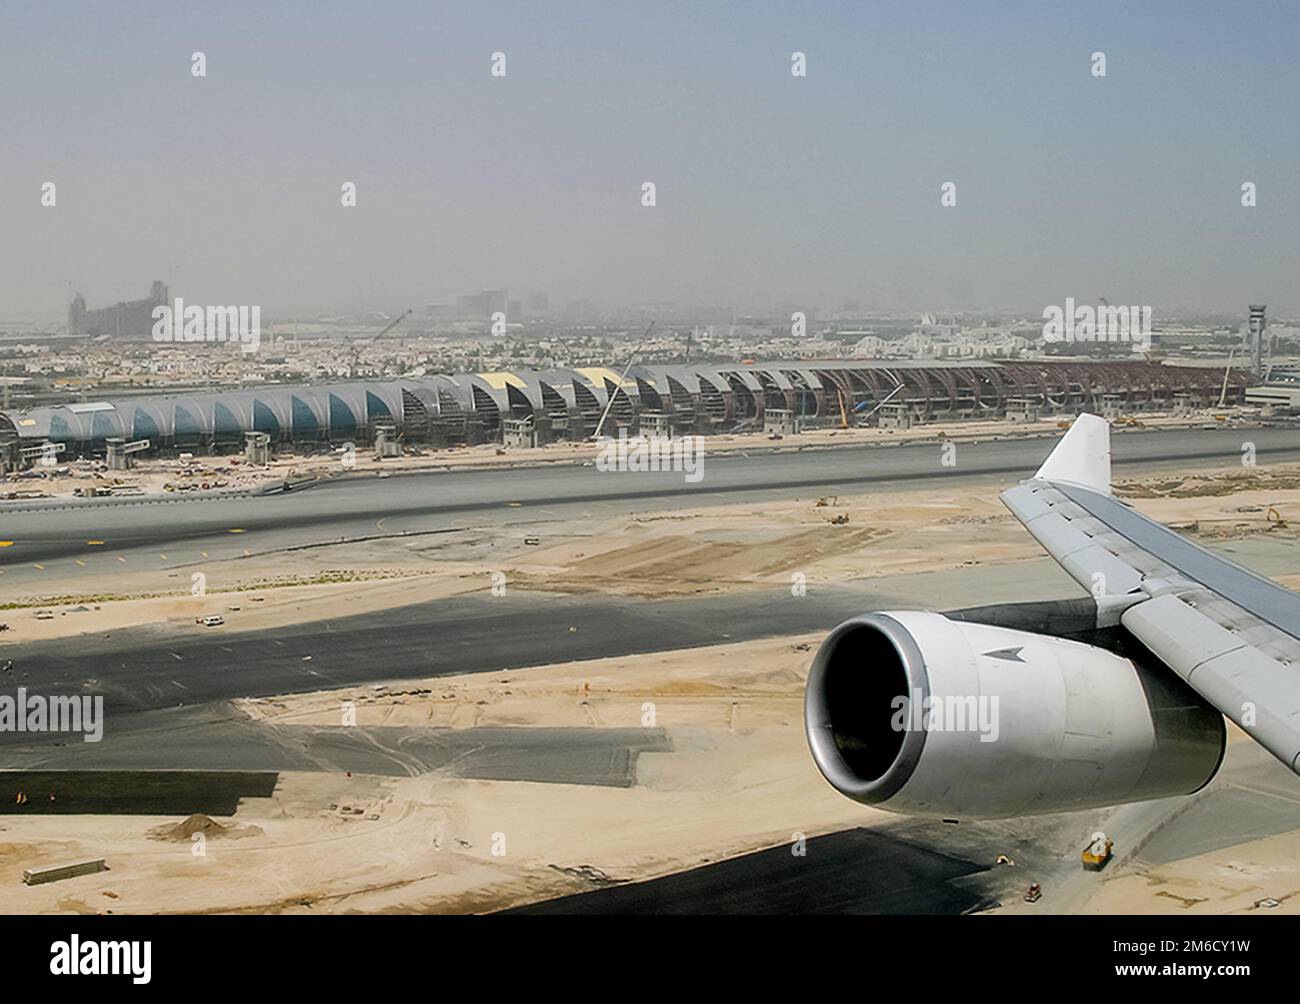 Airport in Dubai, the view from the plane. Stock Photo